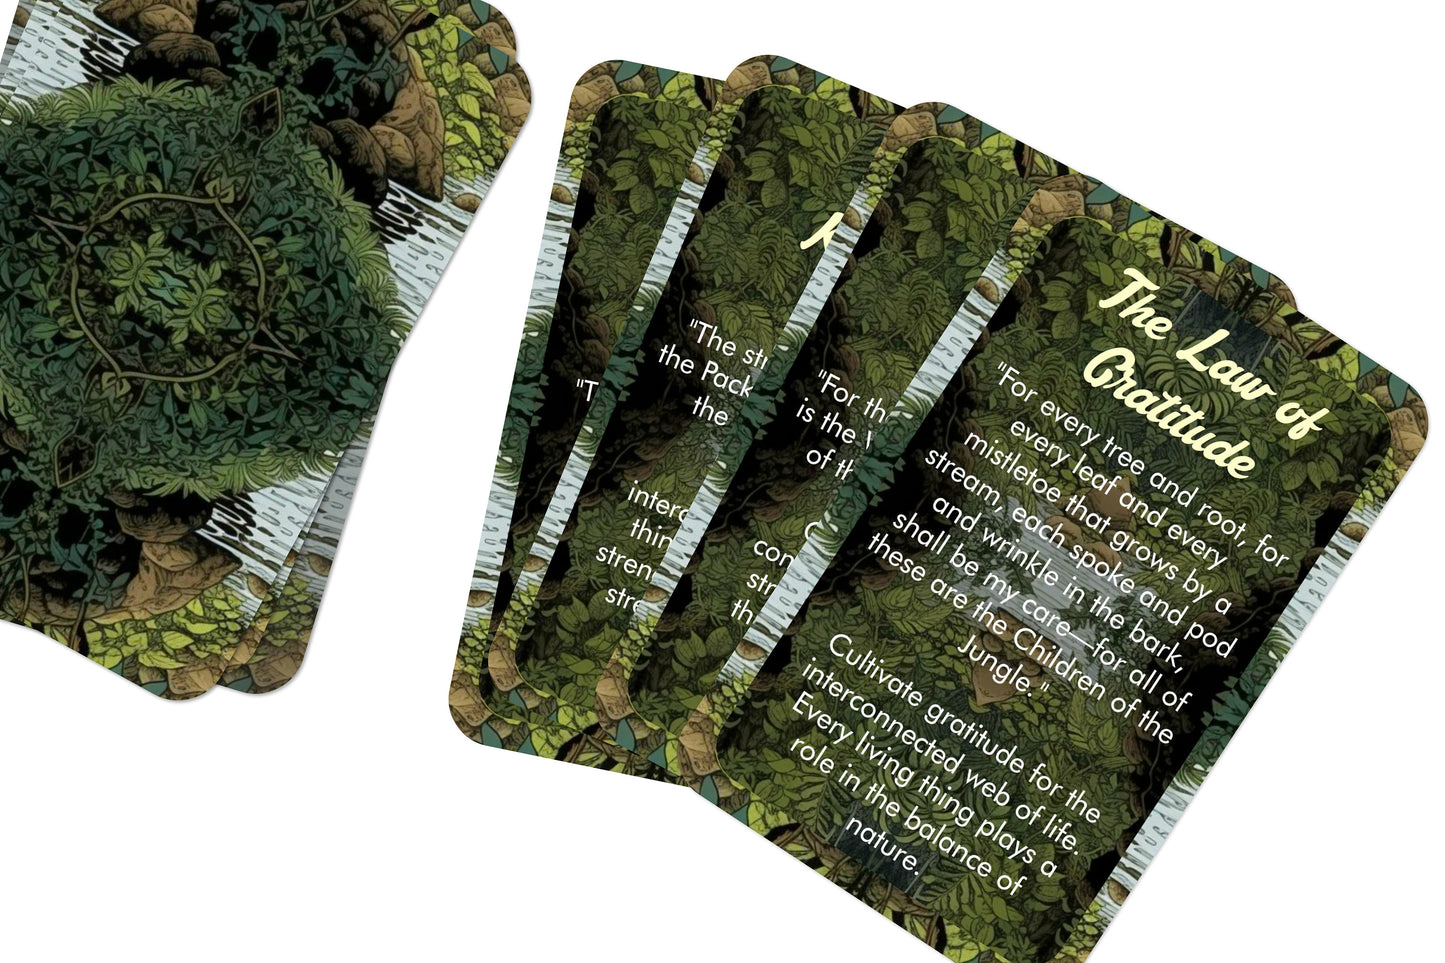 The jungle Book Oracle - Inspired by Rudyard Kipling's classic tales - Divination tools - Oracle cards